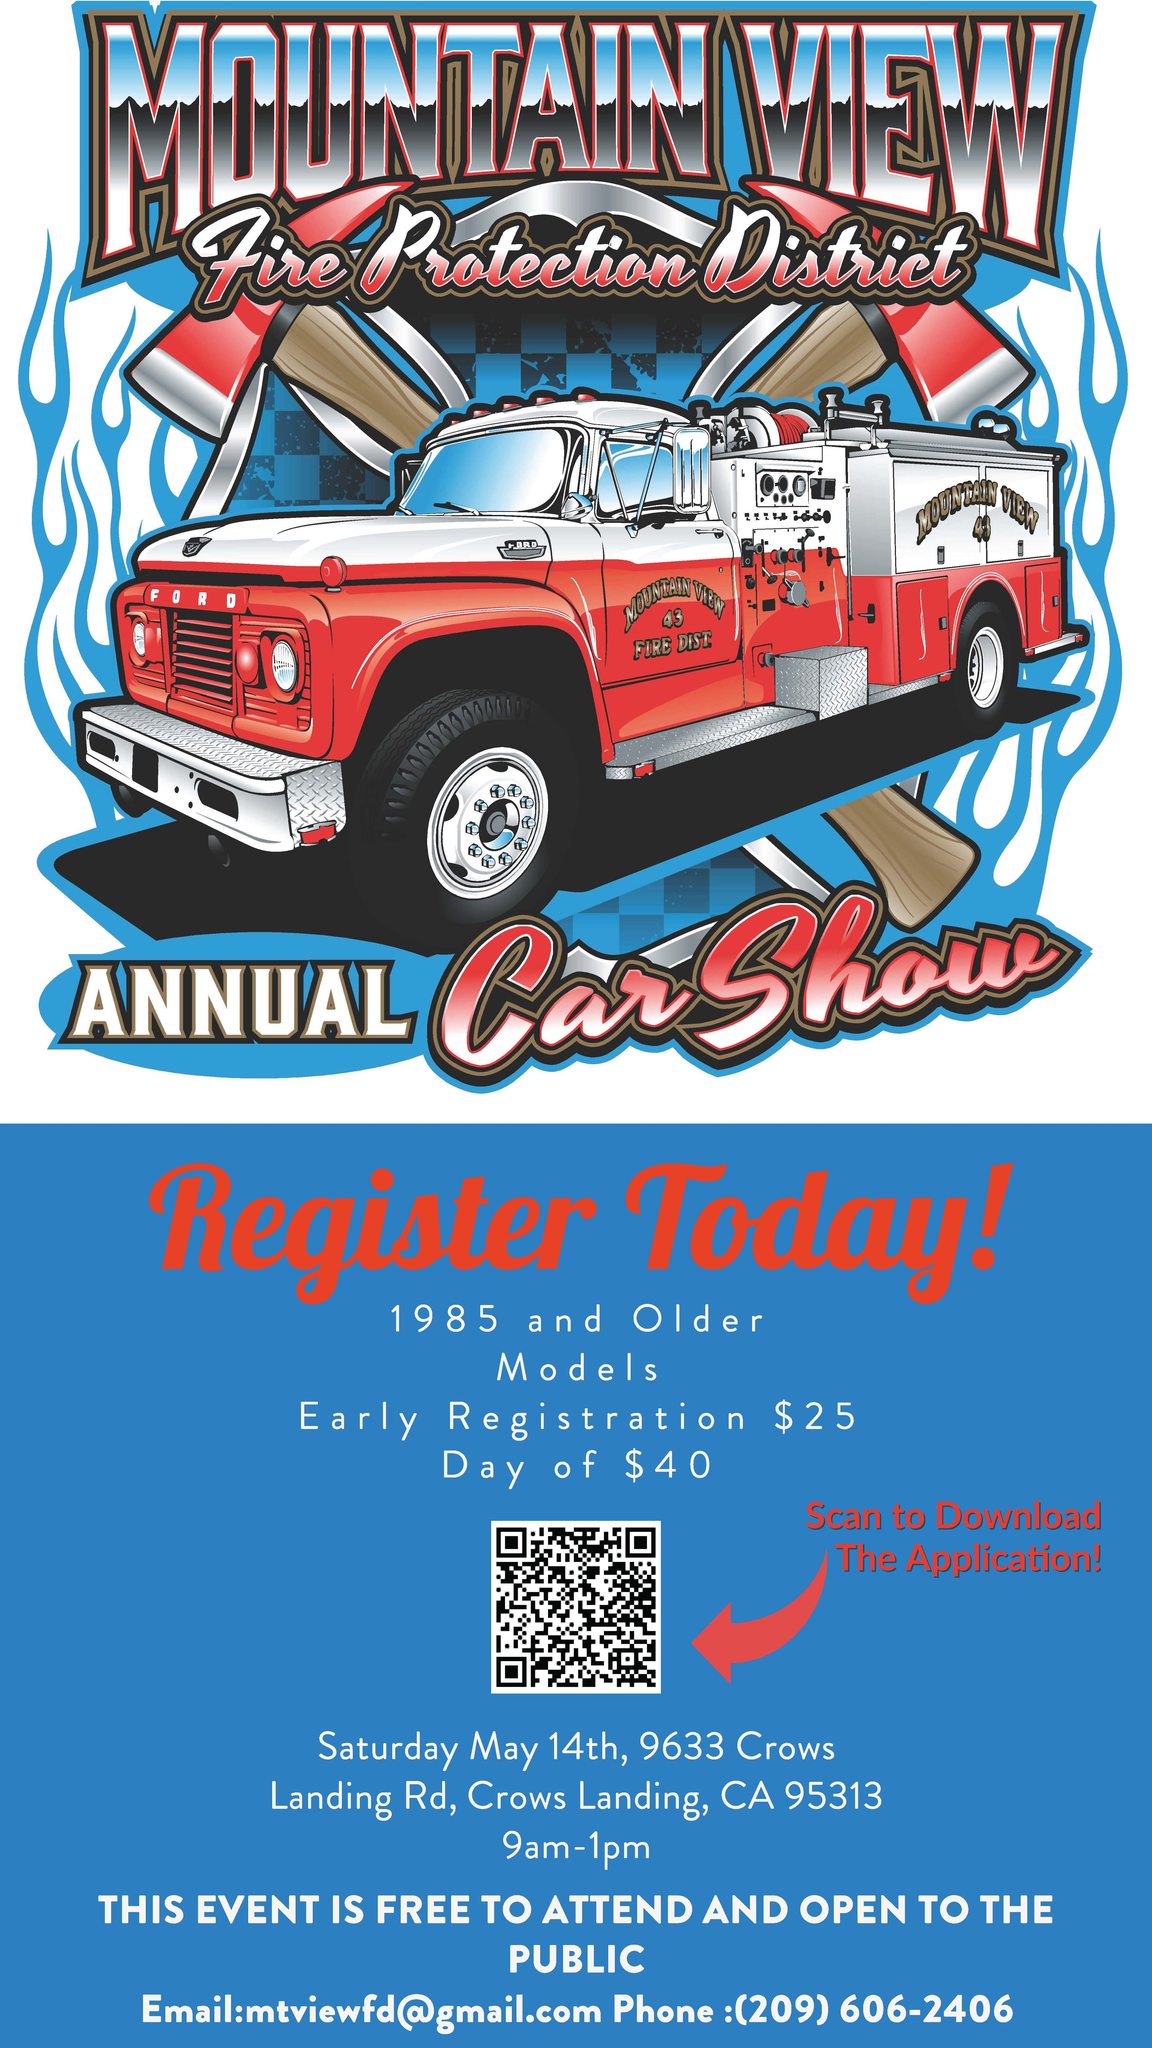 Mountain View Fire Protection District Car Show